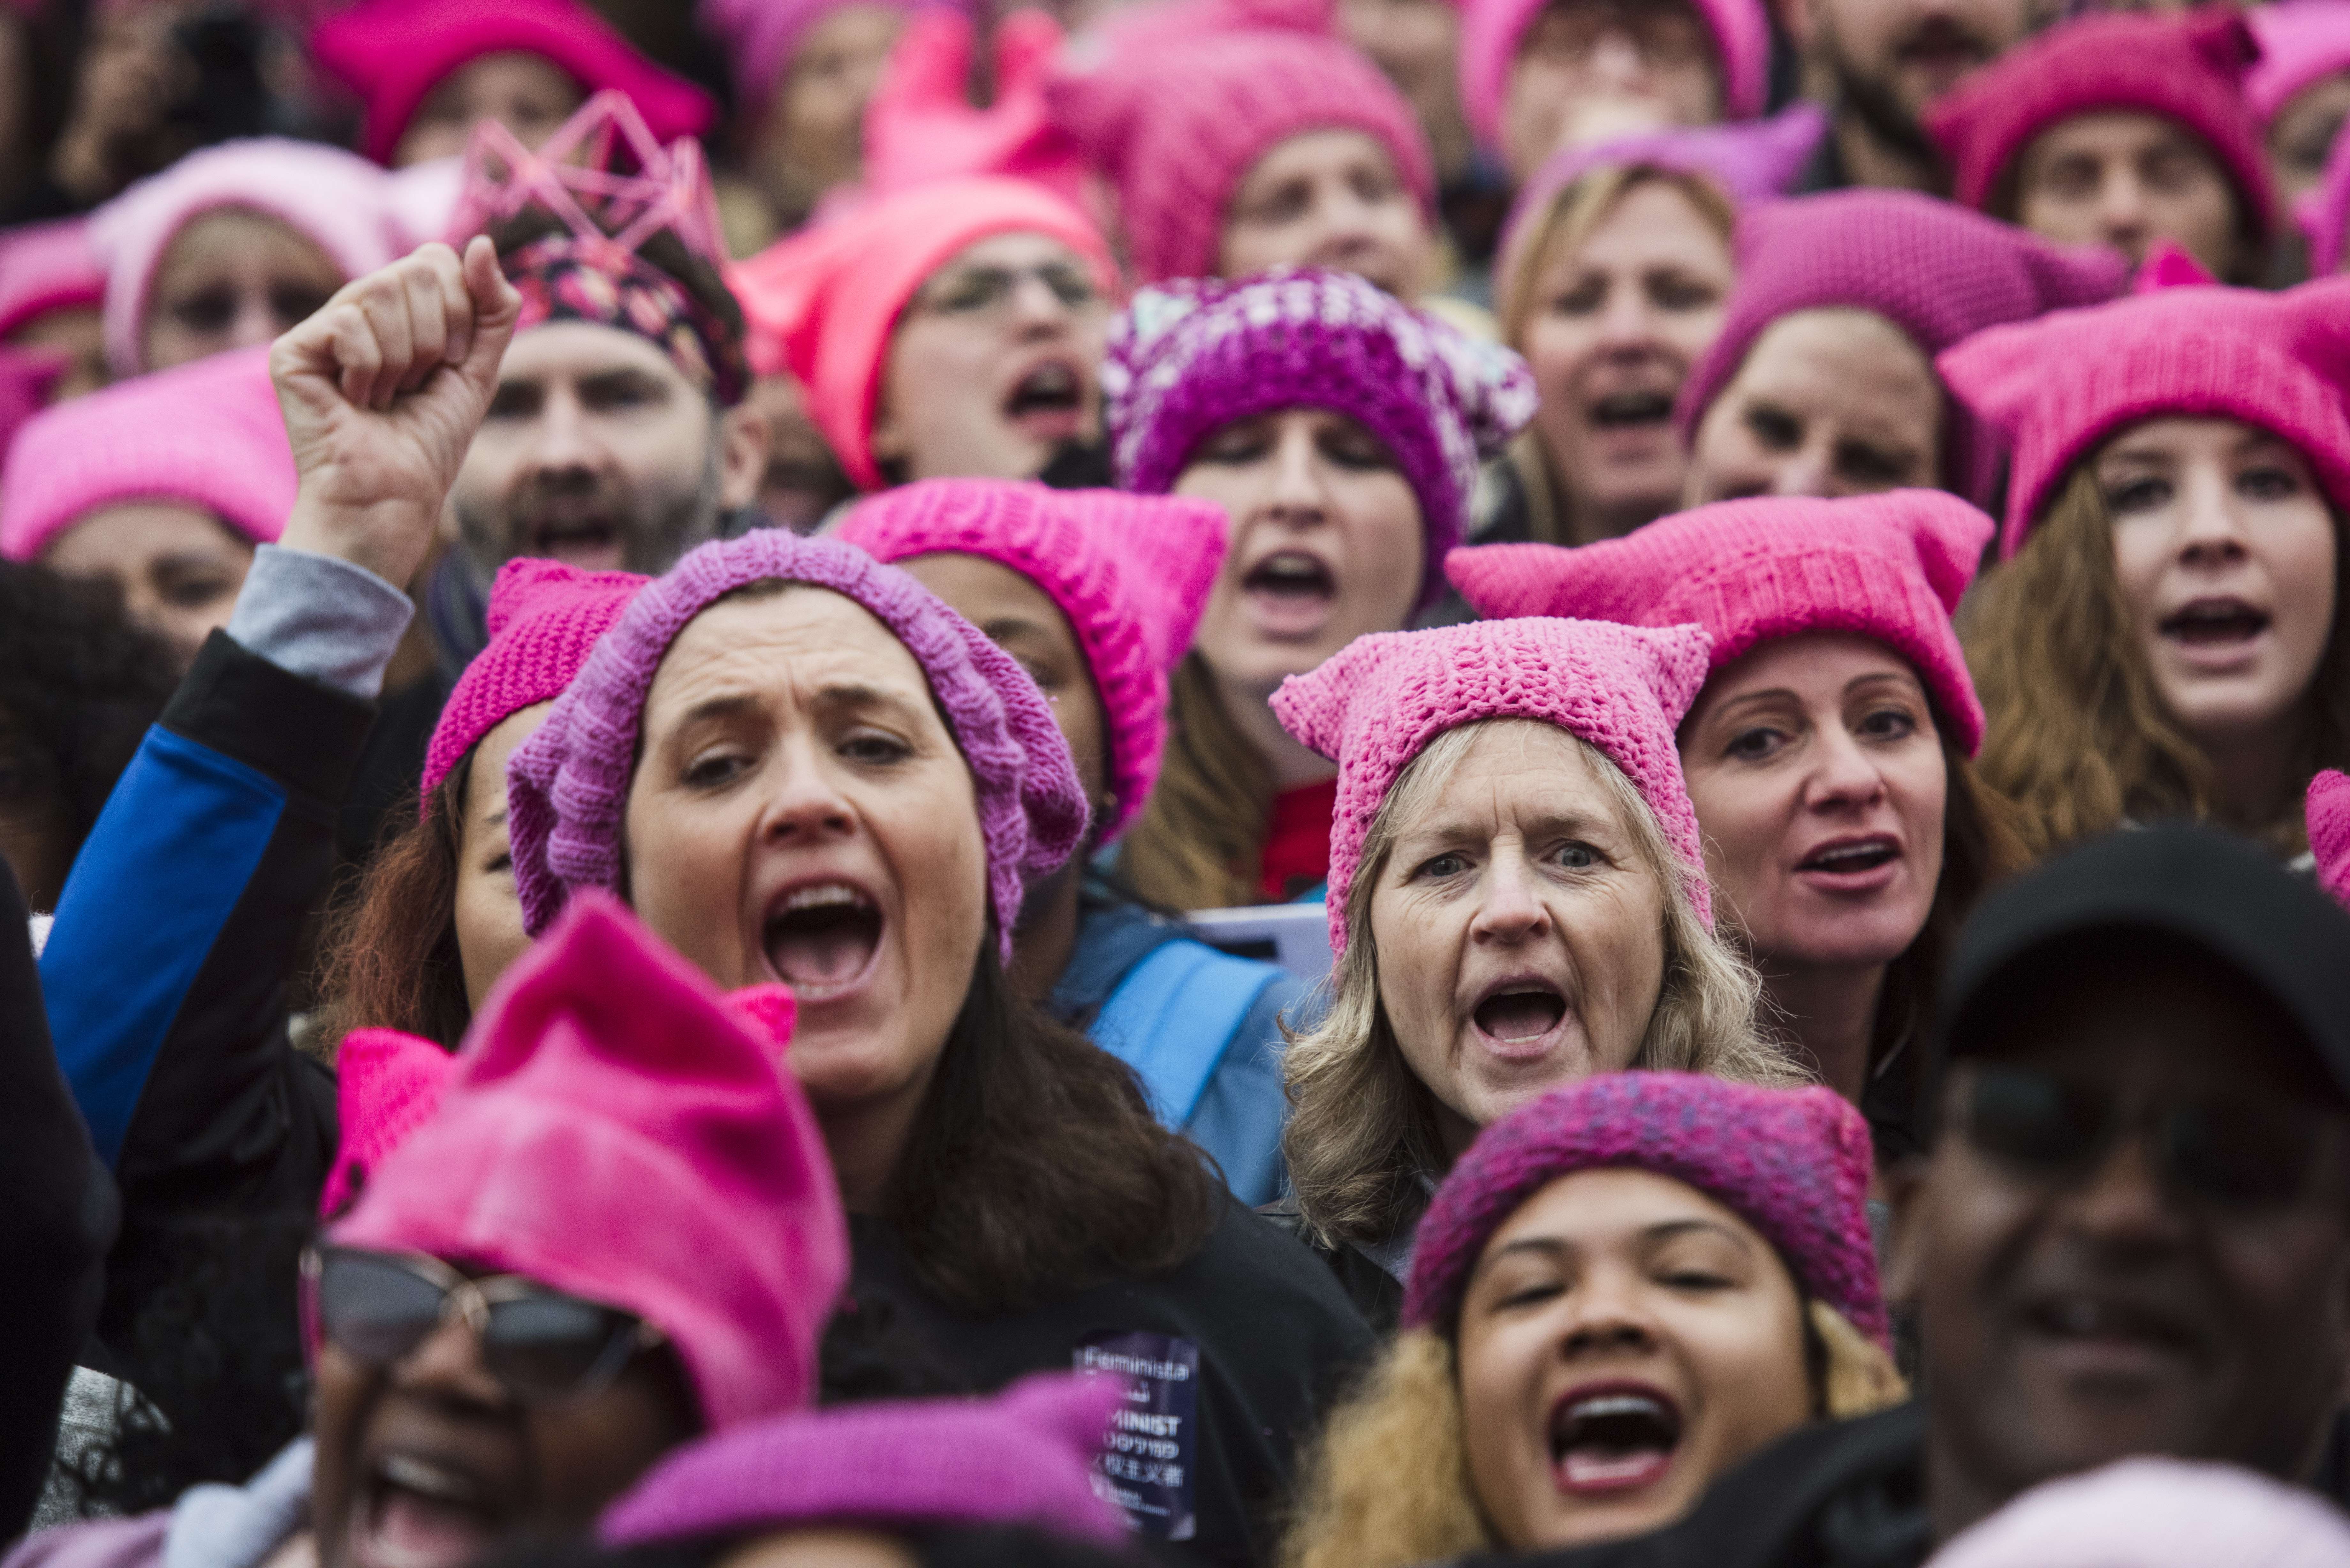 Women took to the streets in unexpectedly large numbers in major U.S. cities on Saturday in mass protests against U.S. President Donald Trump, in an early indication of the strong opposition the newly inaugurated Republican may face in office. Photo: The Washington Post